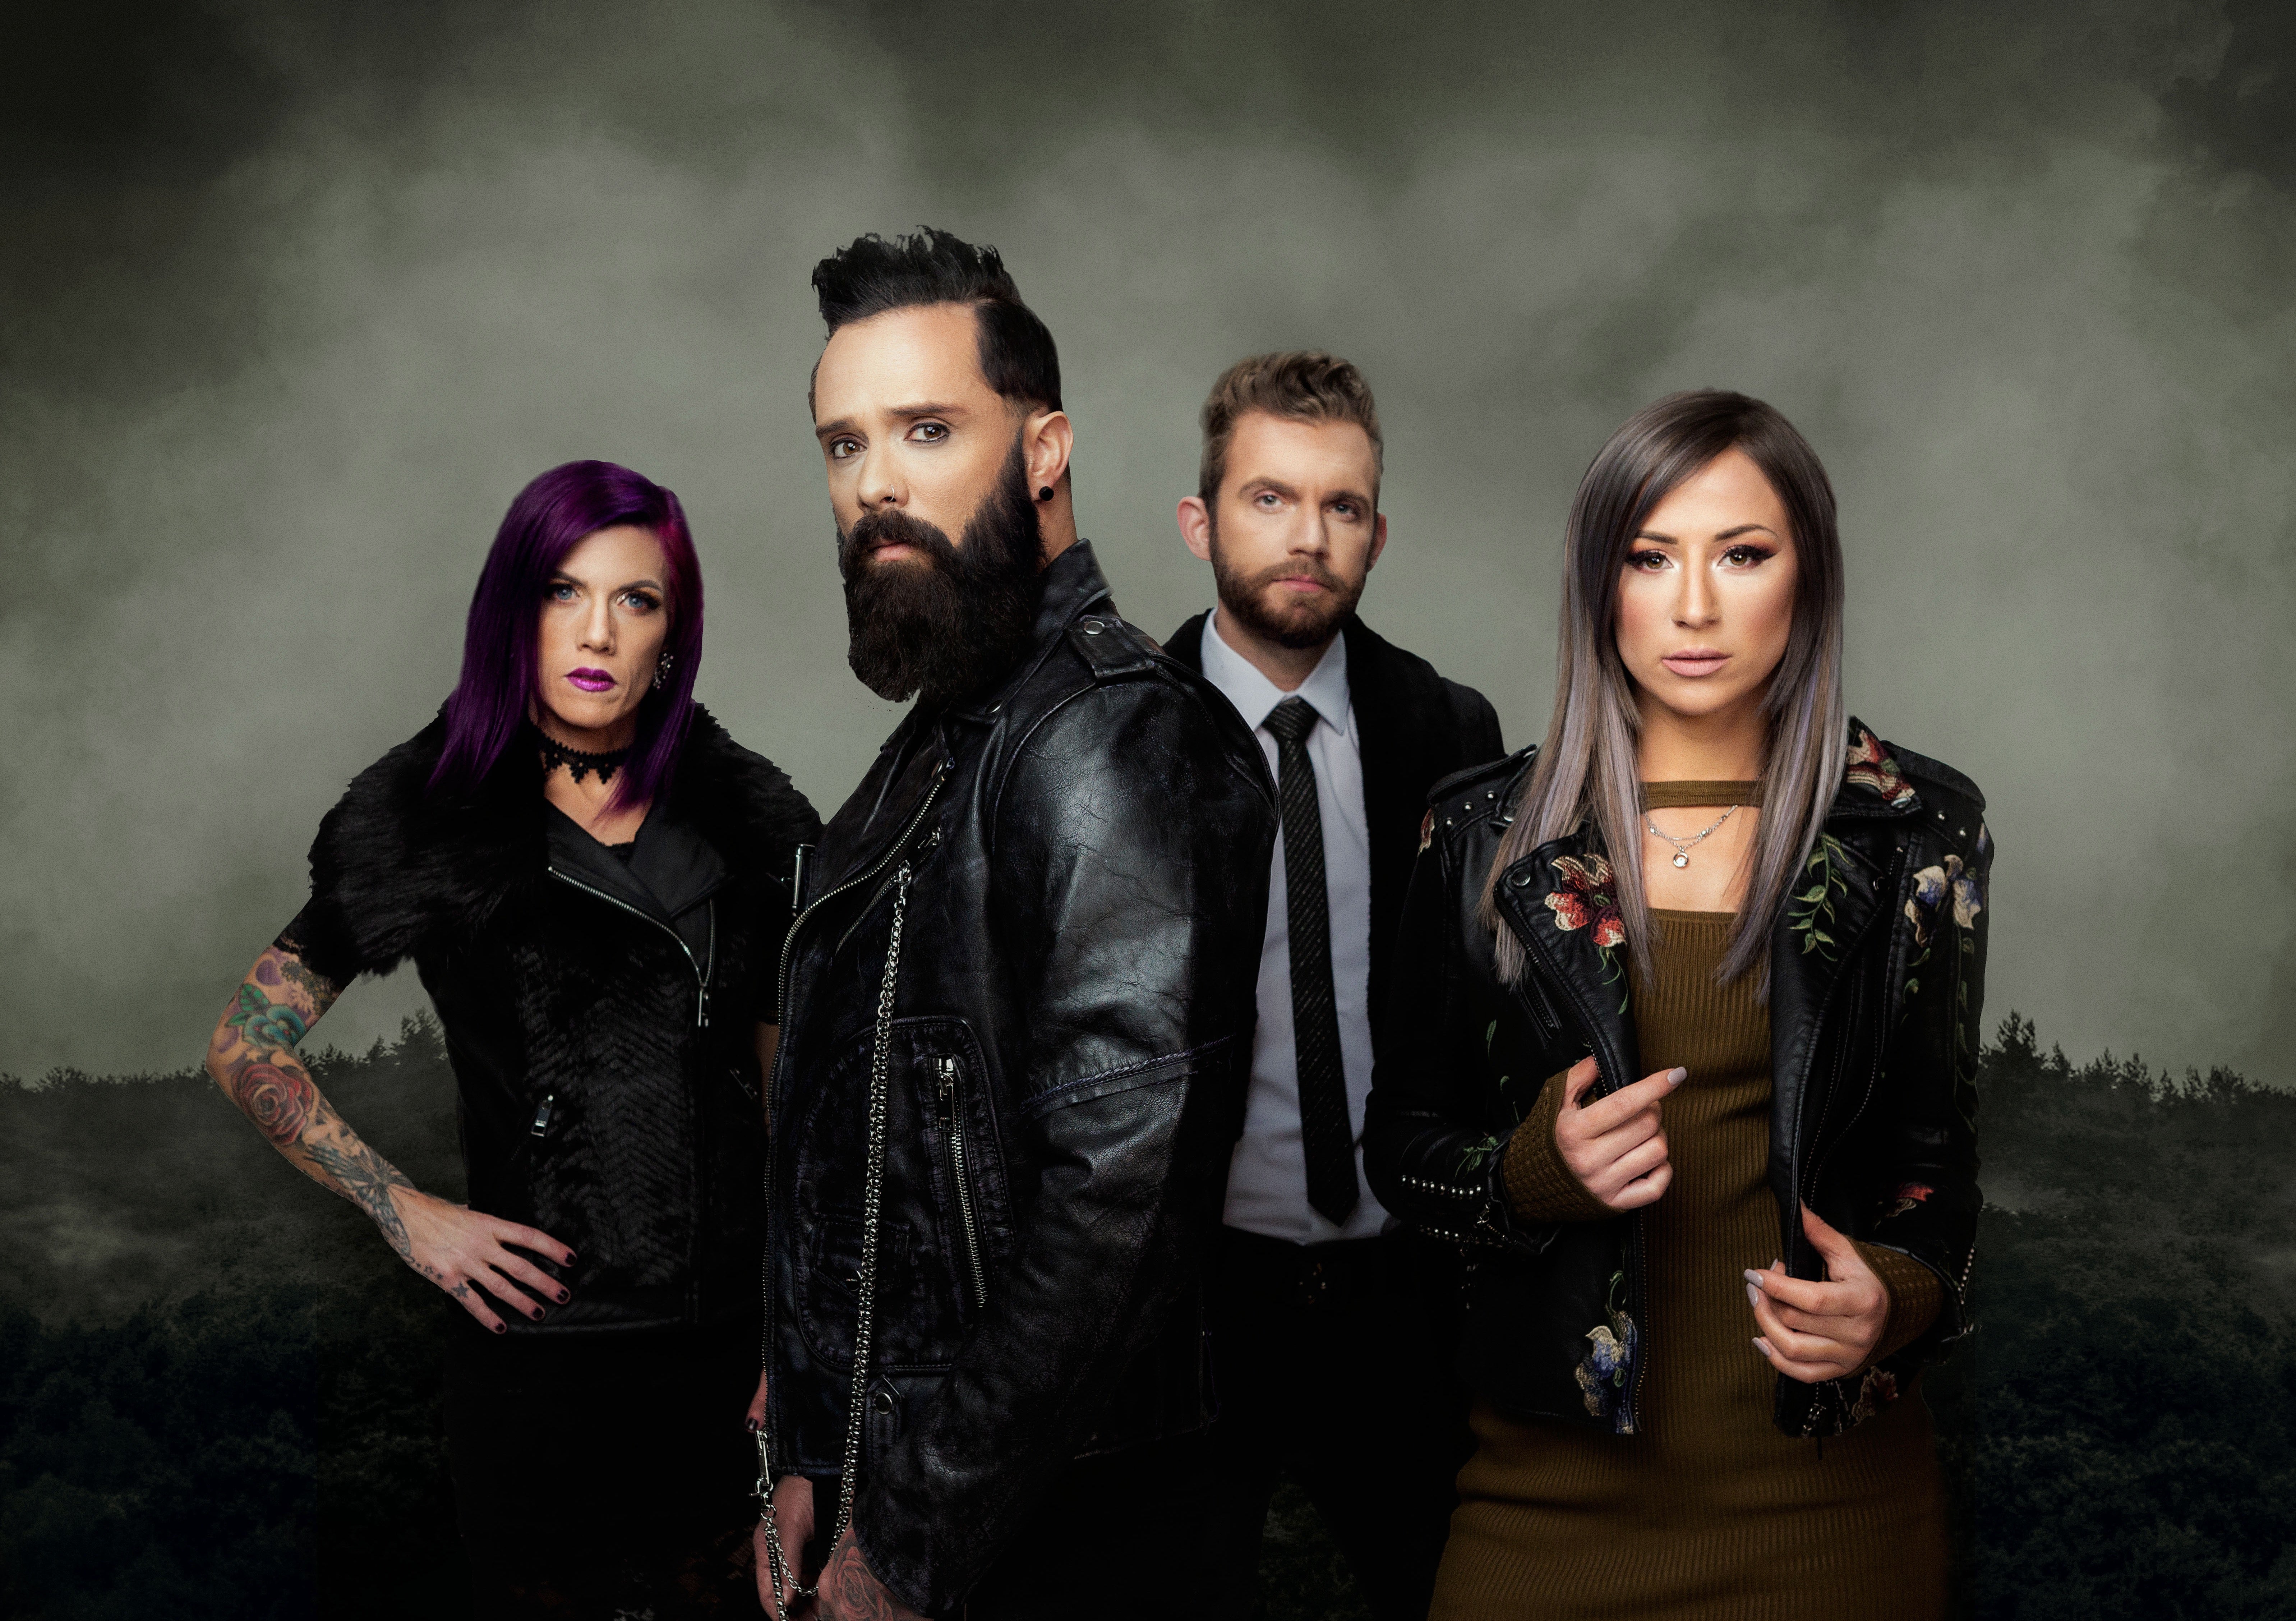 Skillet was in the midst of touring their album “Victorious,” when quaranti...